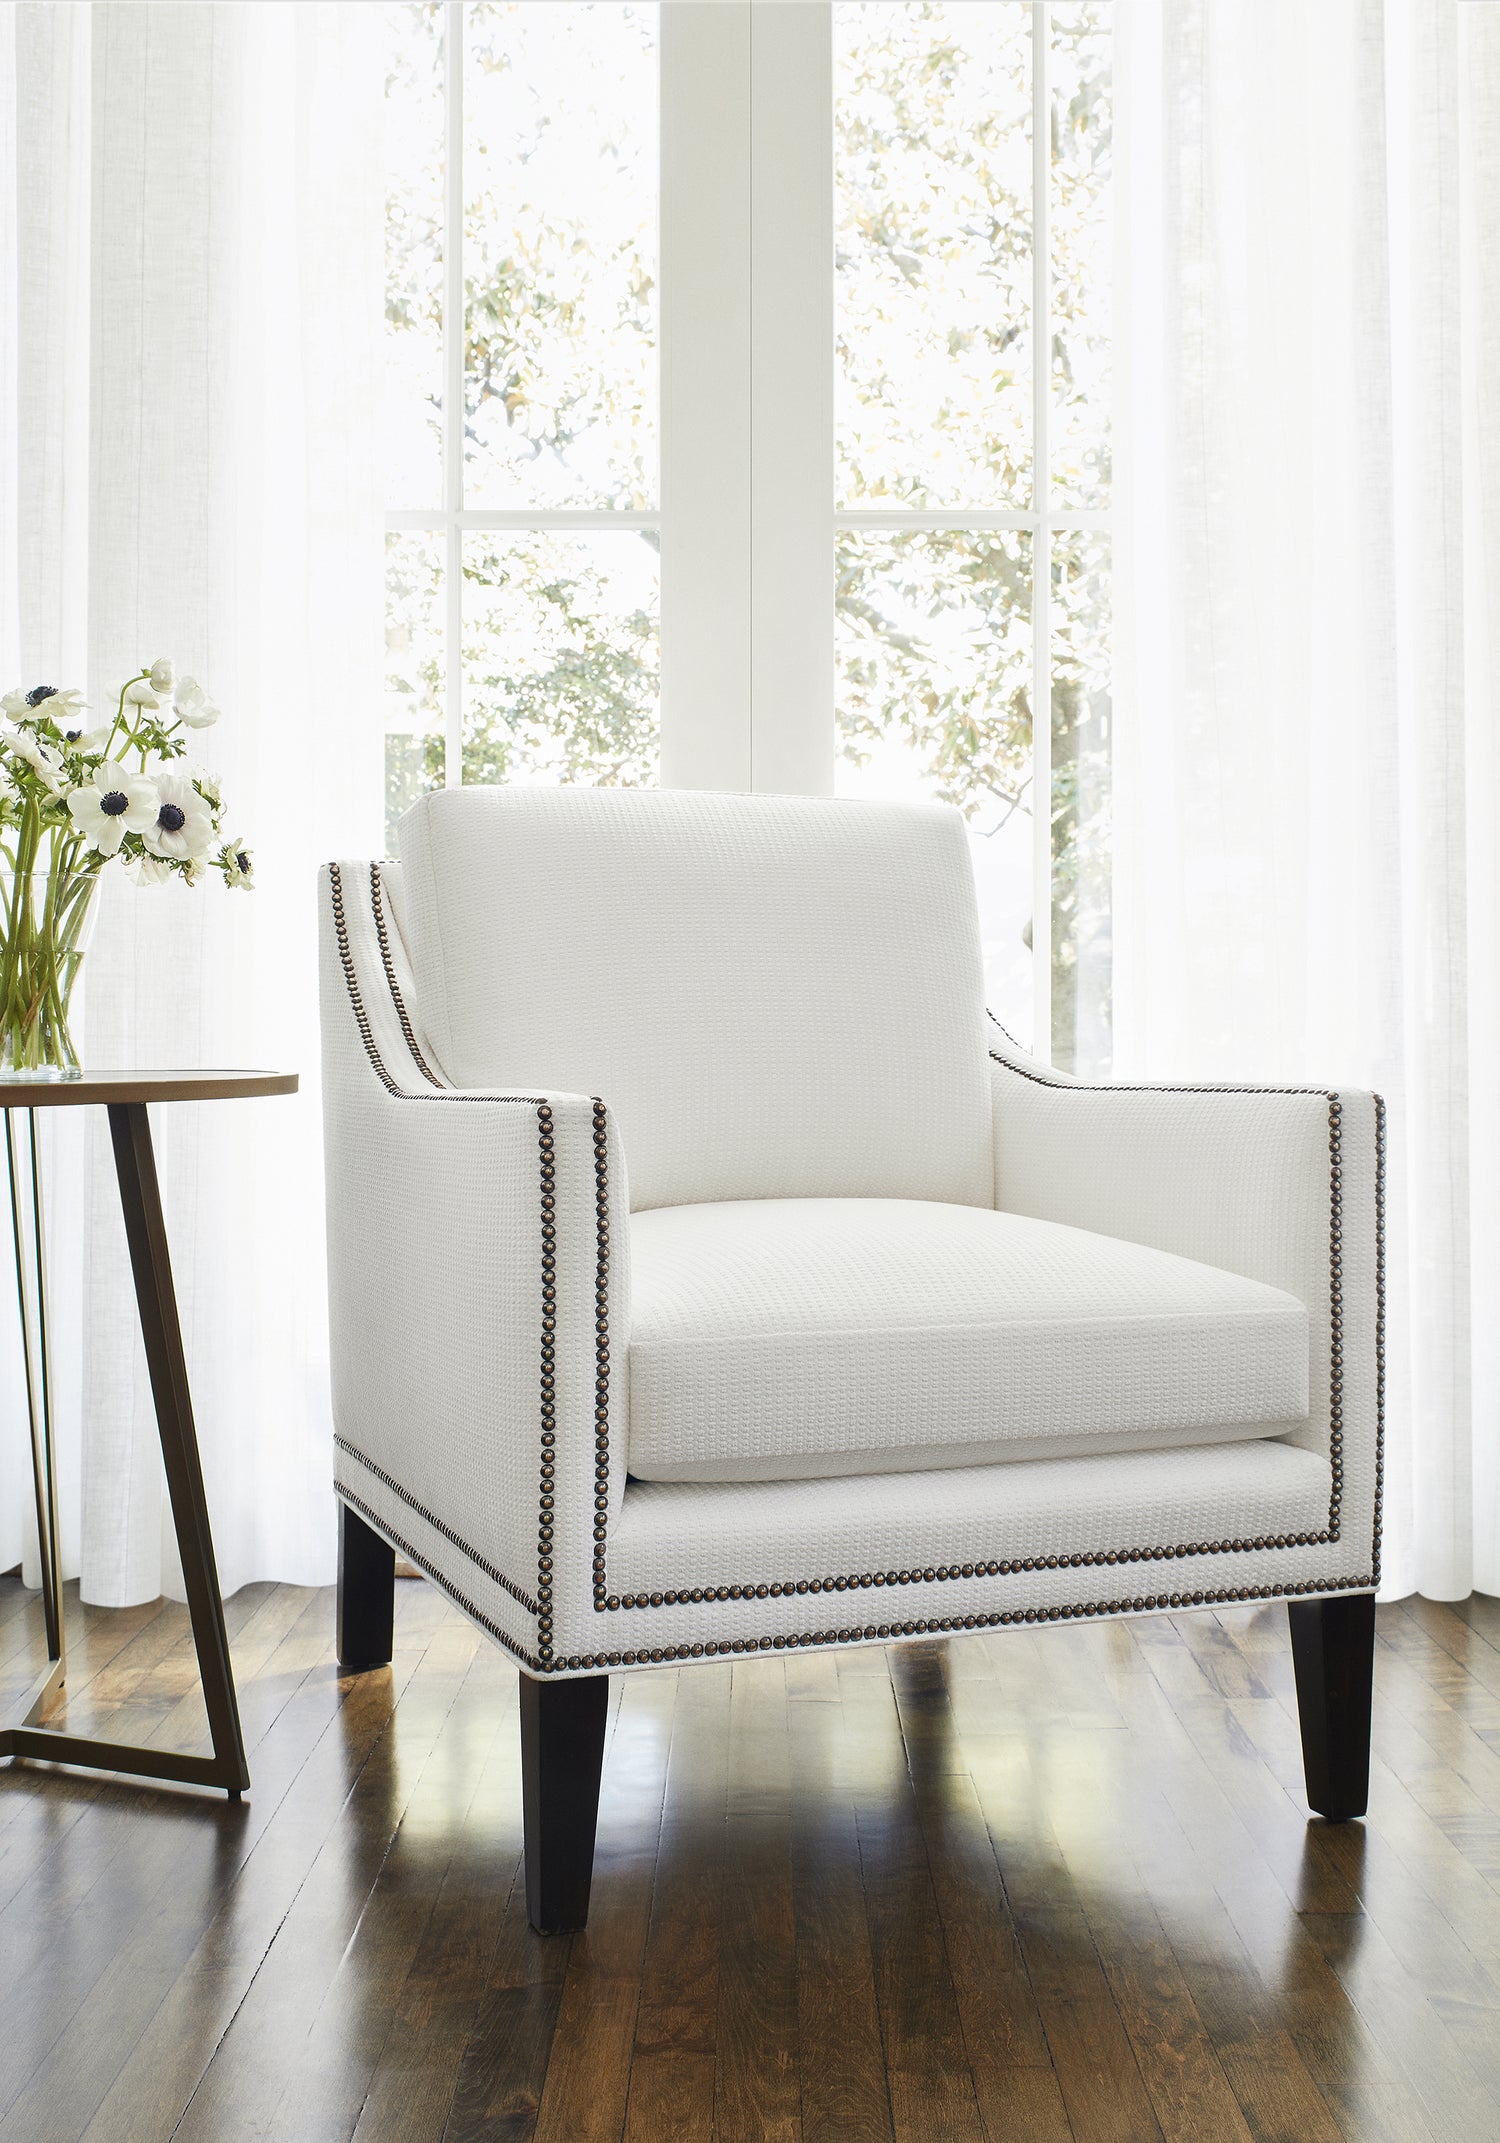 Westwood Chair in Stratus woven fabric in Ivory color - pattern number W75225 - by Thibaut in the Elements collection